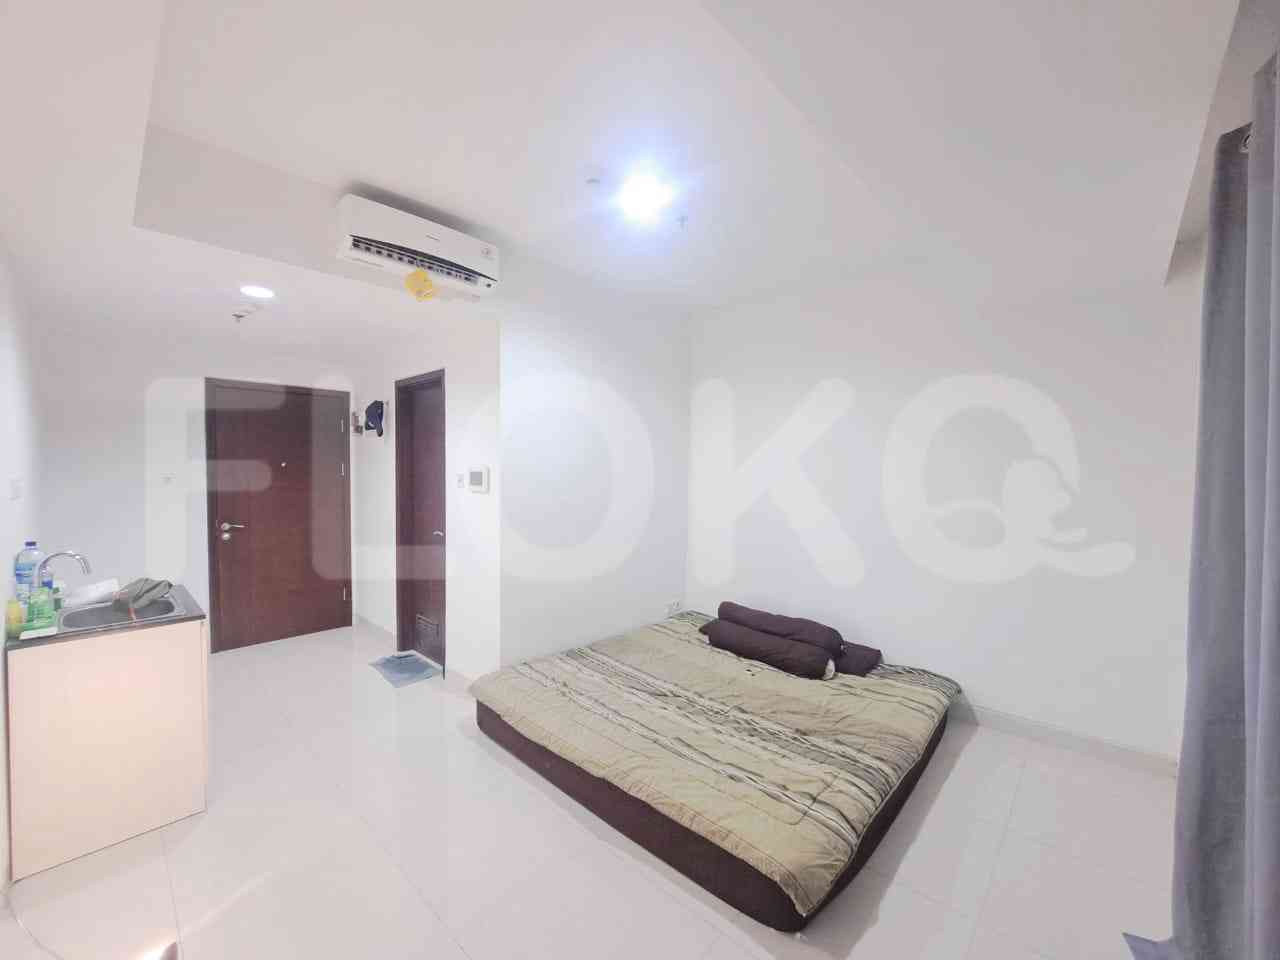 30 sqm, 30th floor, 1 BR apartment for sale in Cengkareng 1